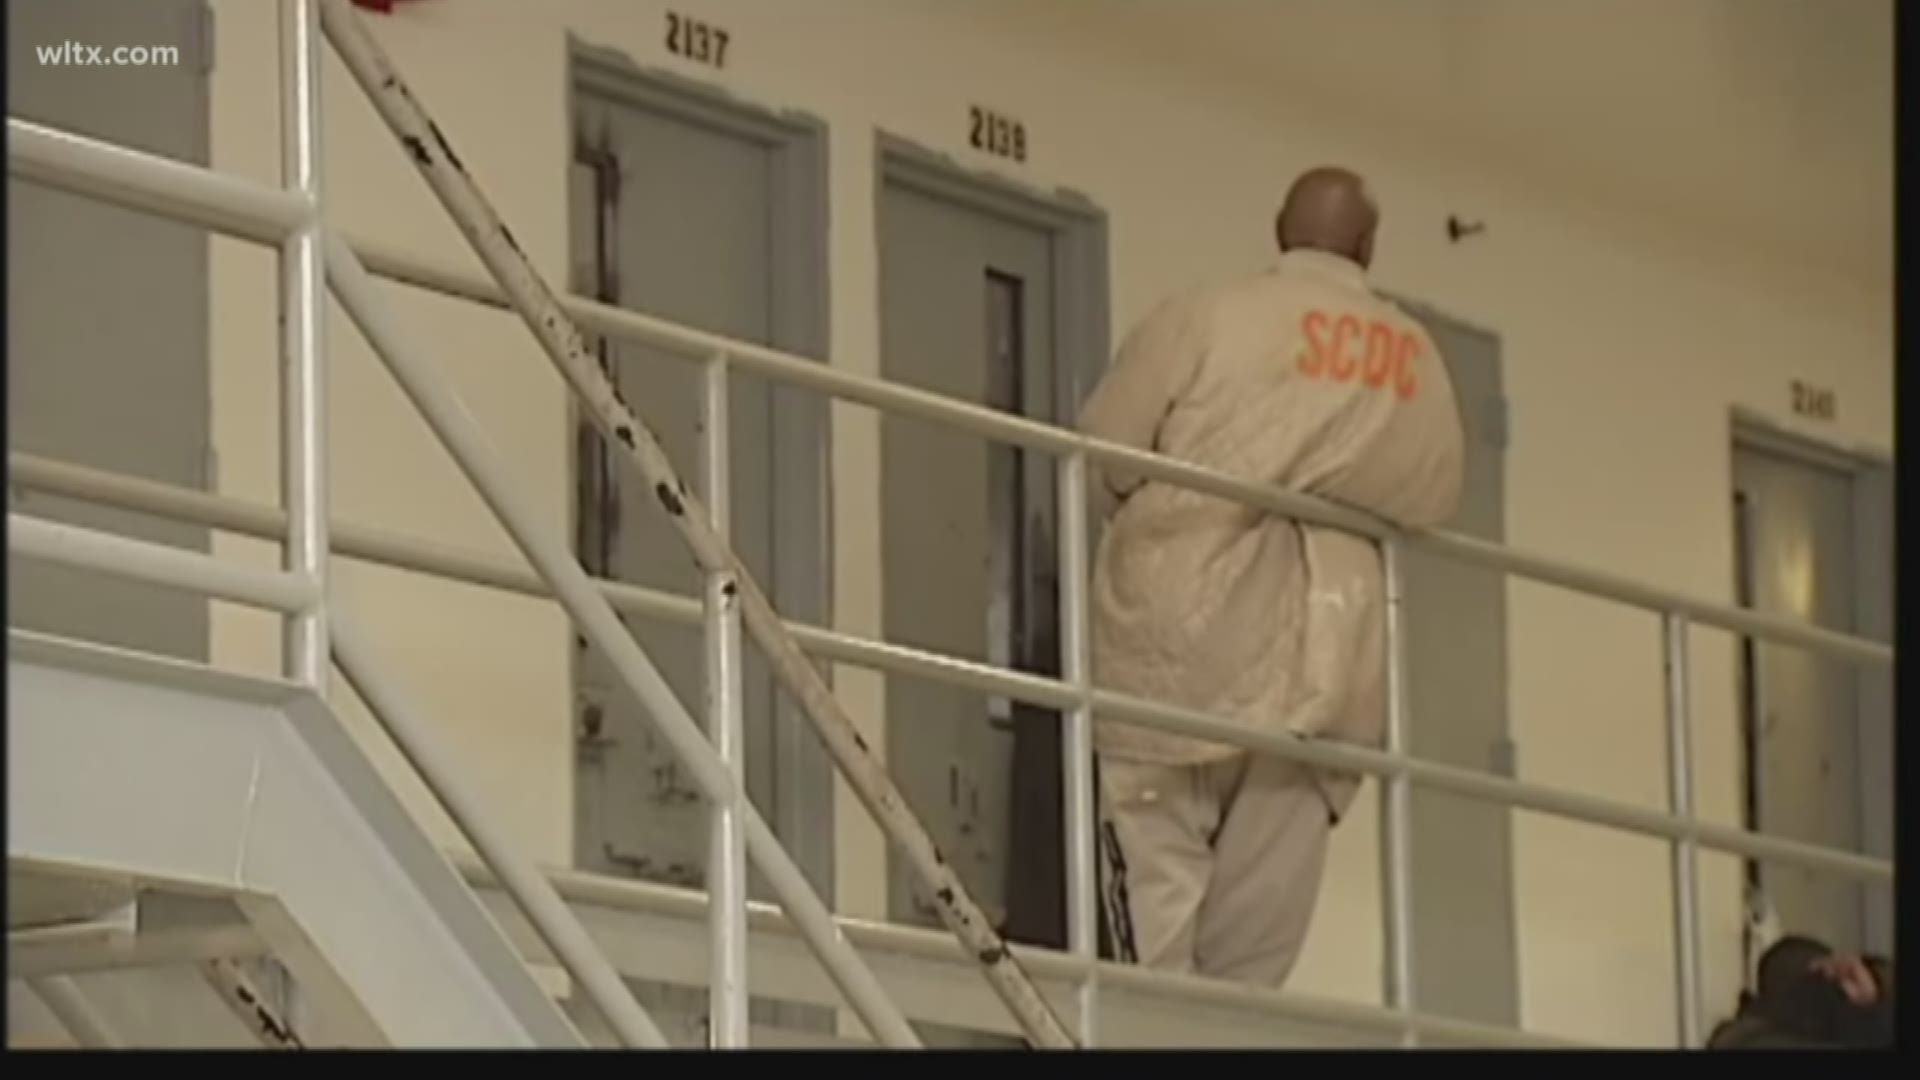 According to the South Carolina Department of Corrections, an inmate was found dead in his cell.